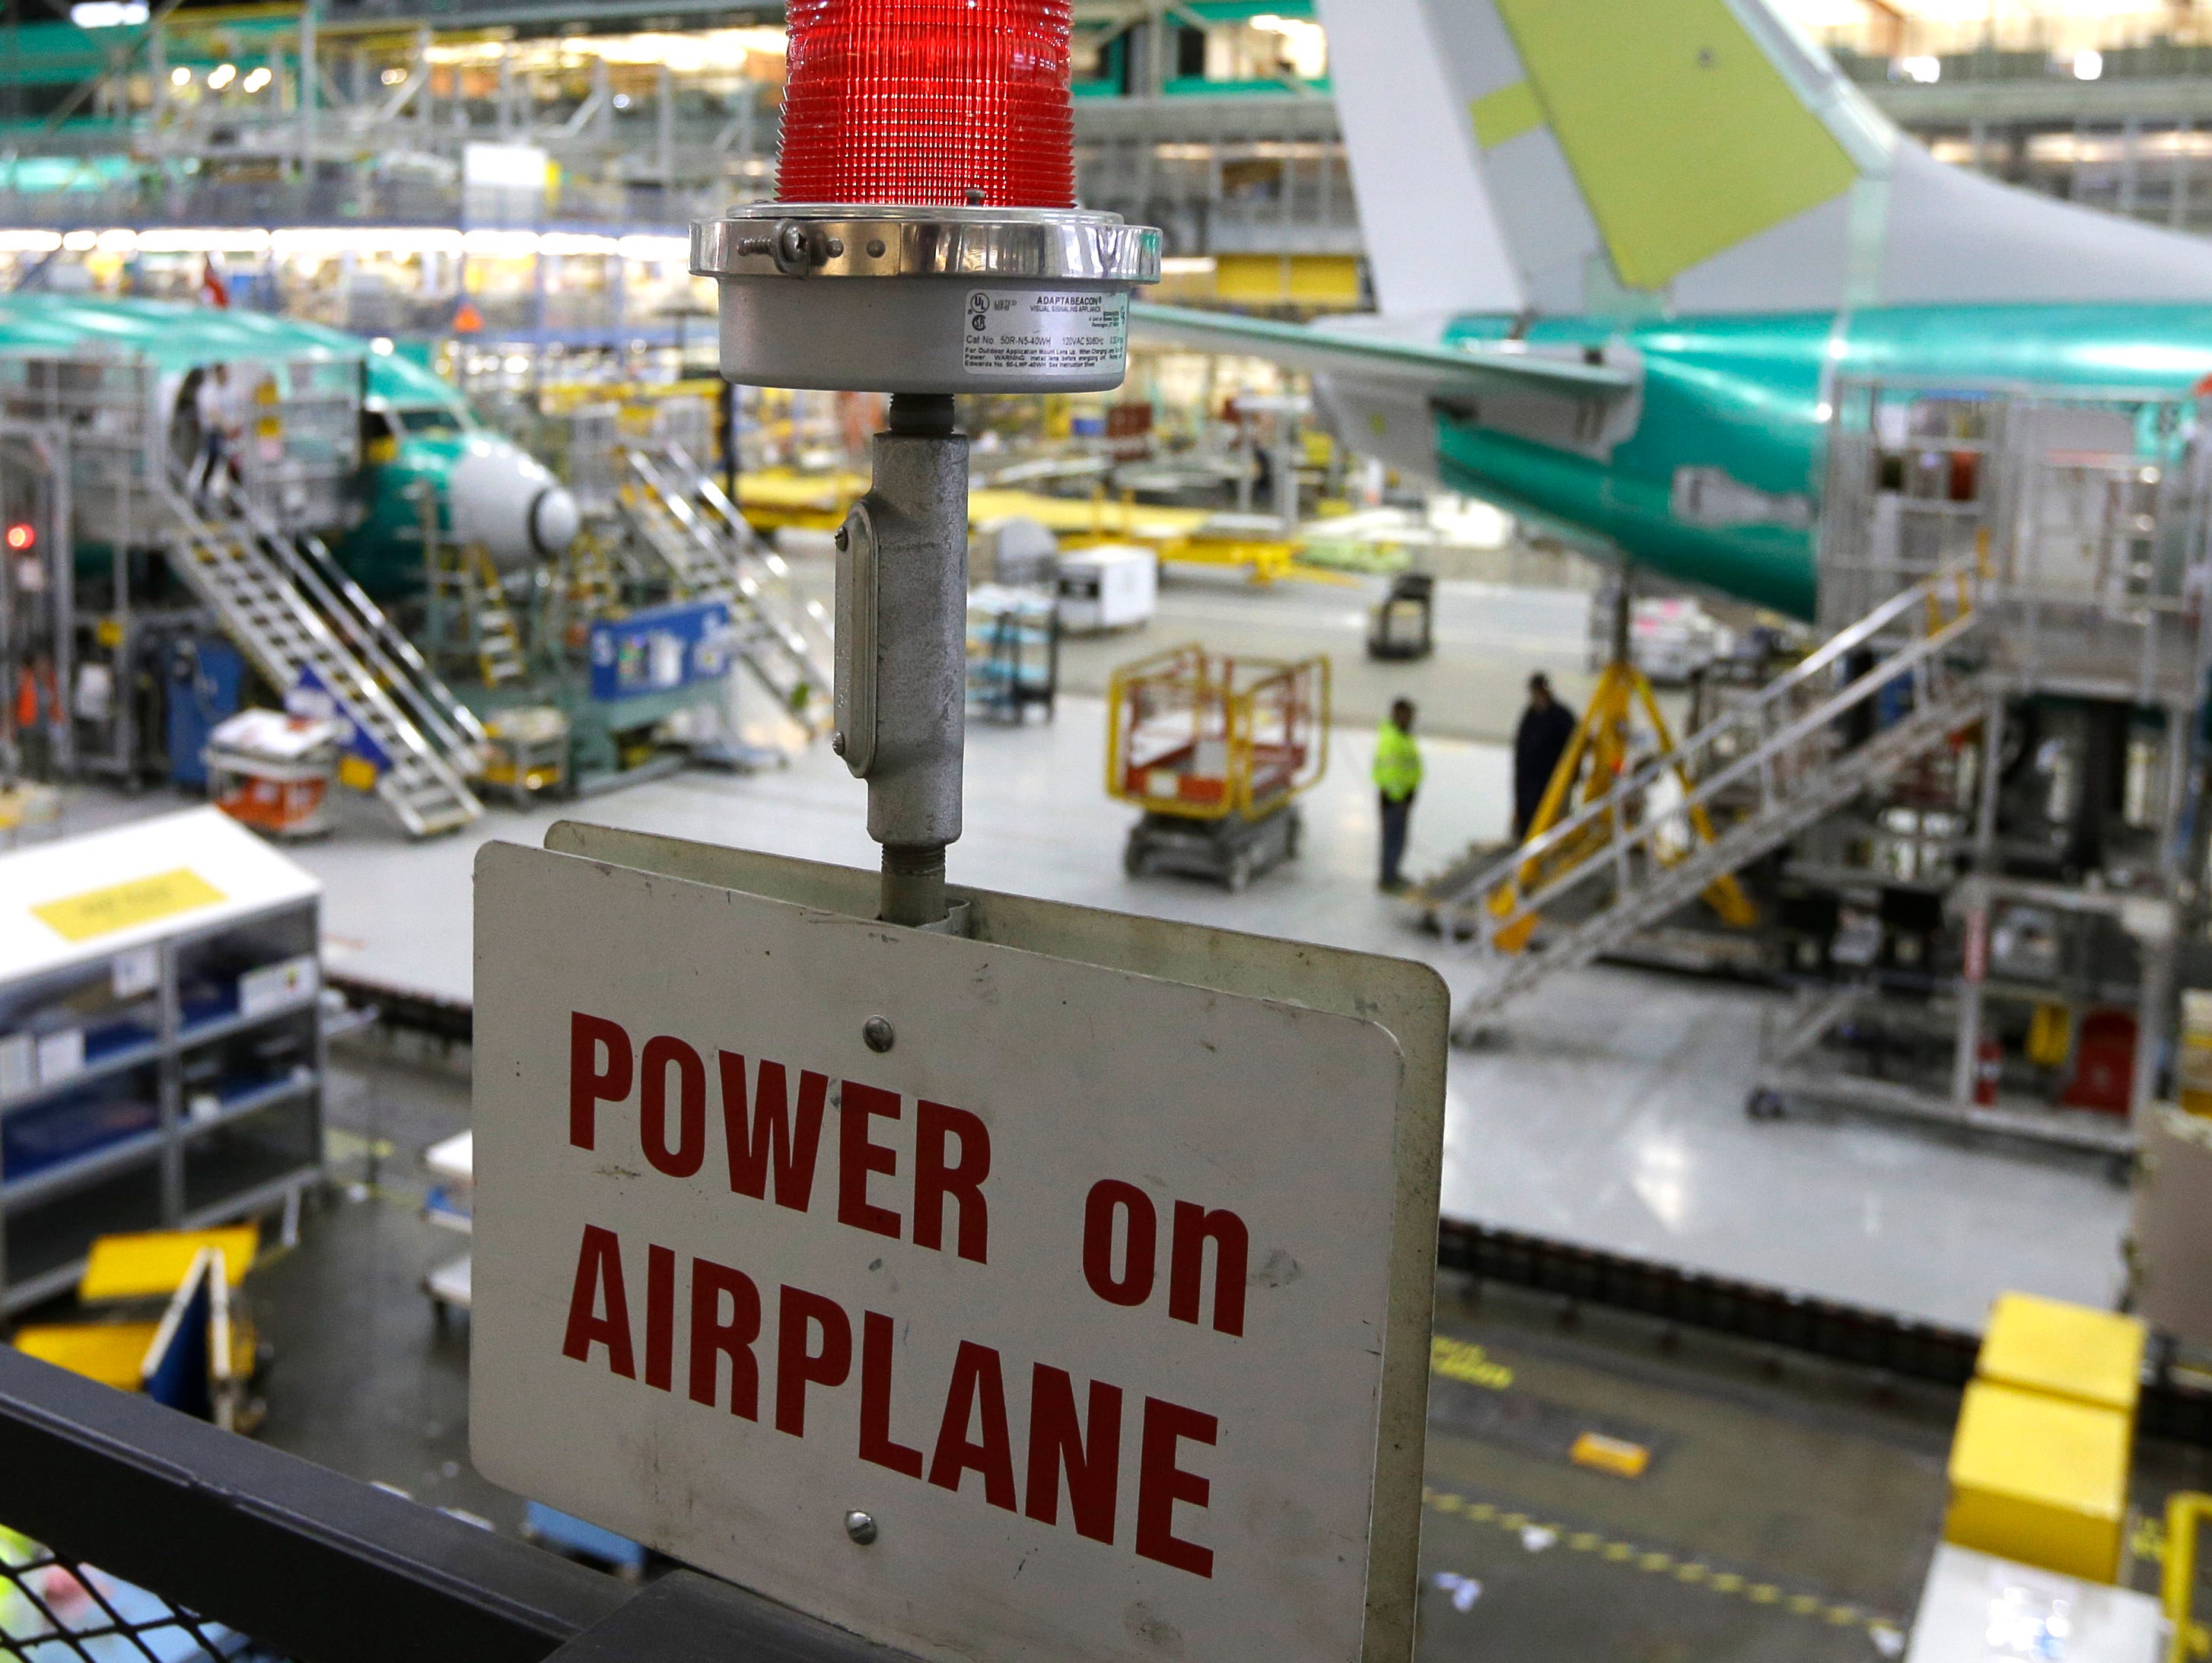 A sign indicates that power is turned on Tuesday, Dec. 16, 2014, at Boeing's 737 assembly facility in Renton, Wash.